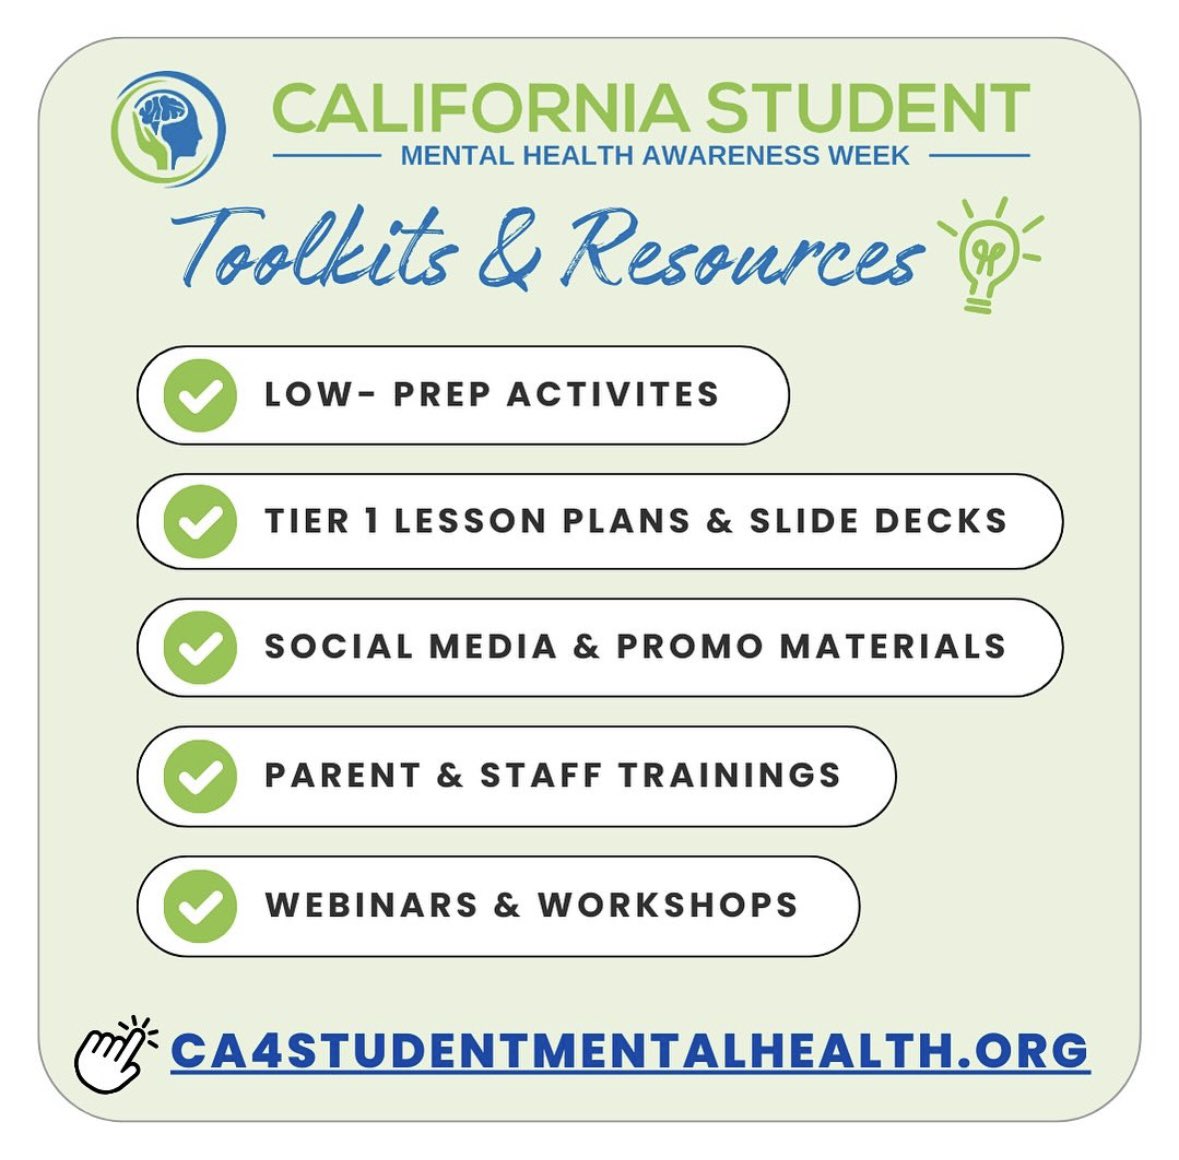 Don’t forget to download the toolkits and resources as you prepare for Student Mental Health Awareness Week! They can be found on our new website ca4studentmentalhealth.org linked in our bio!! #ca4studentmentalhealth